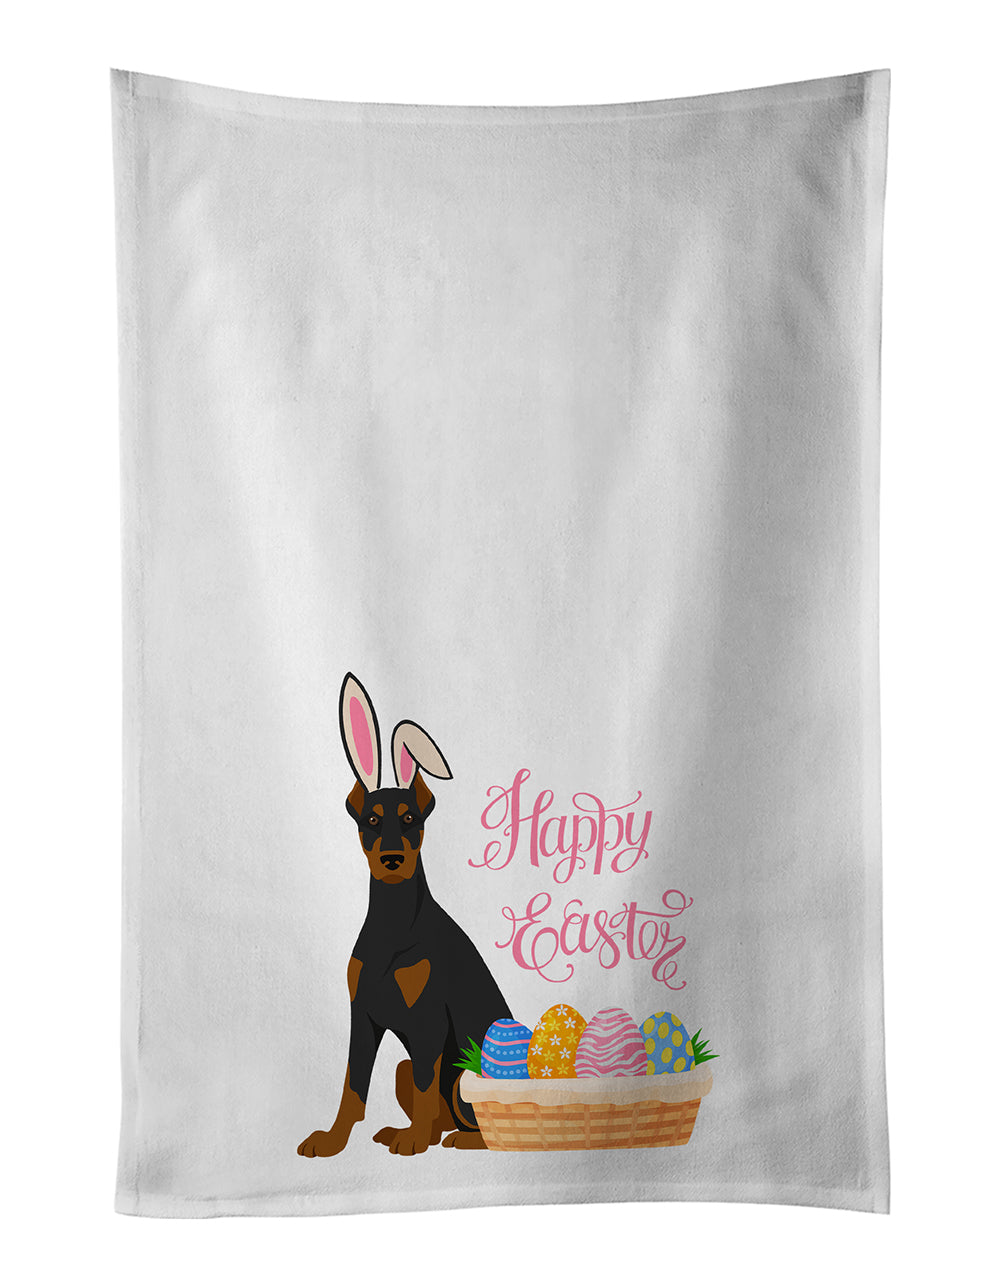 Buy this Black and Tan Doberman Pinscher Easter White Kitchen Towel Set of 2 Dish Towels